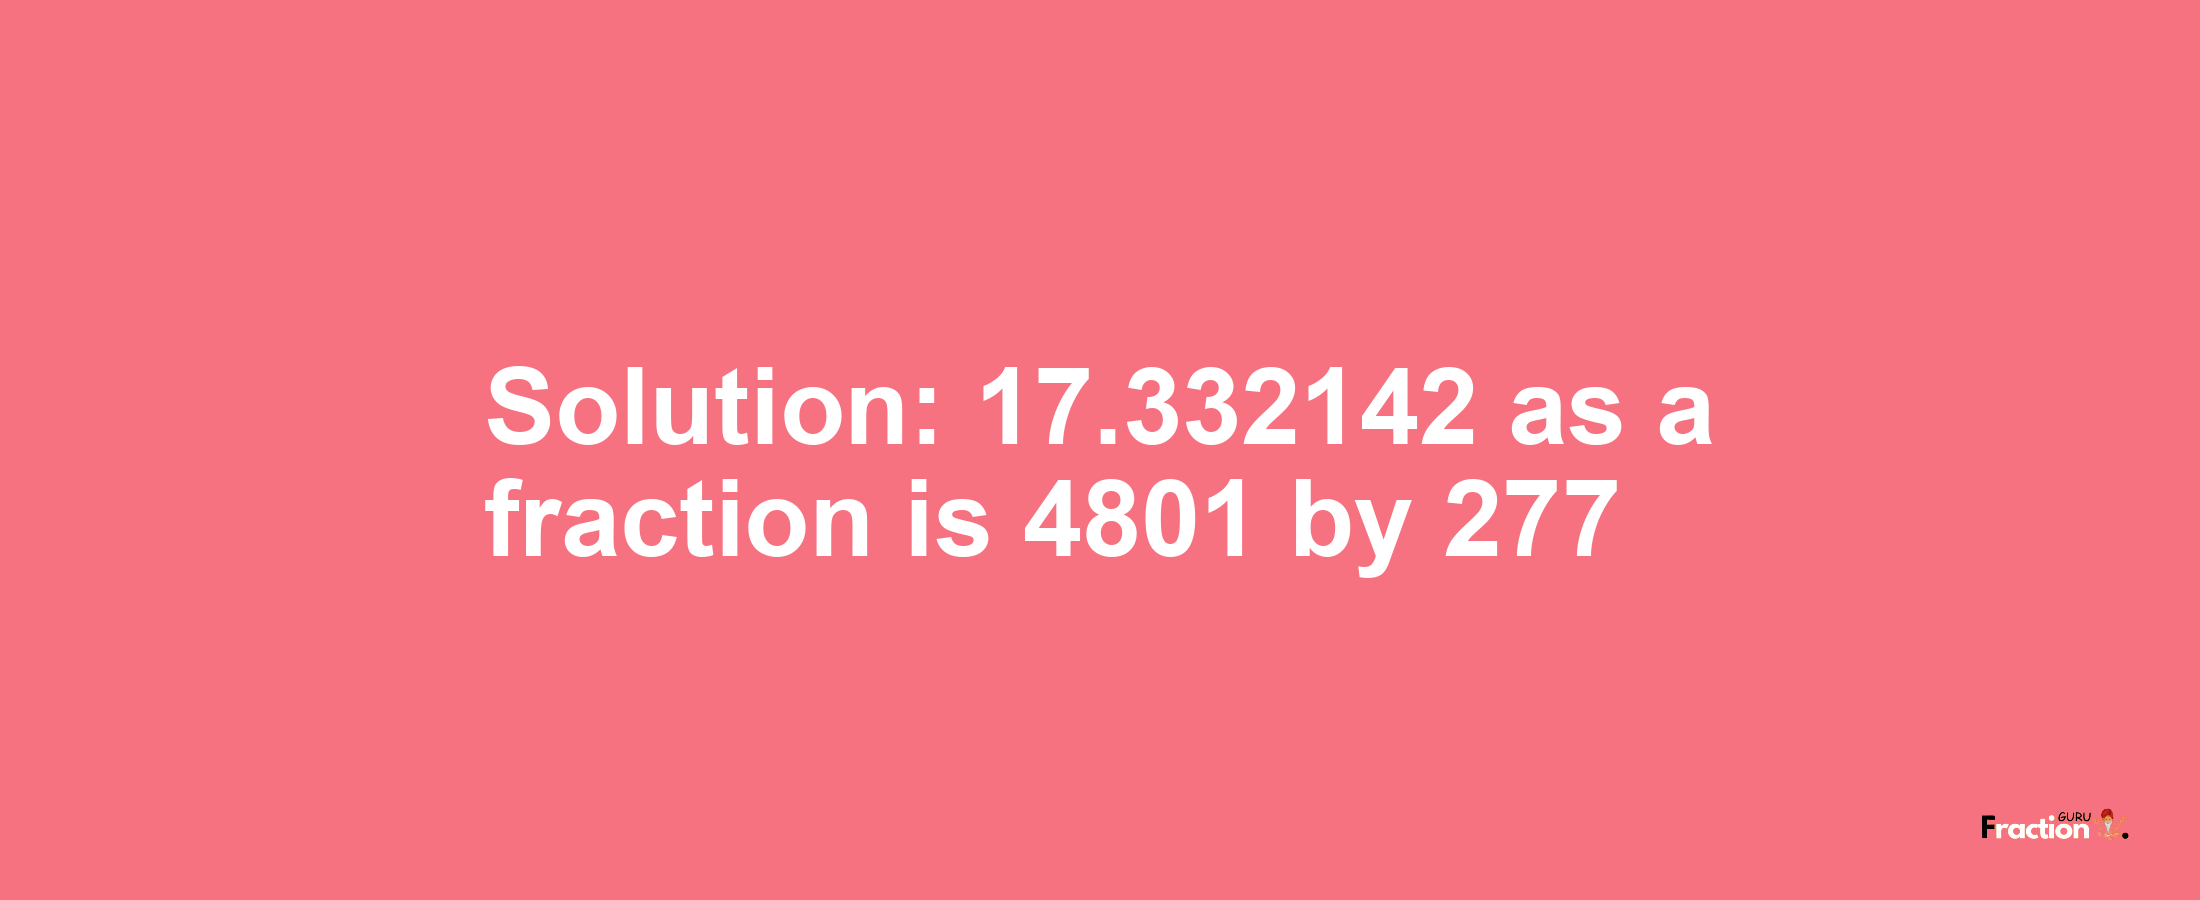 Solution:17.332142 as a fraction is 4801/277